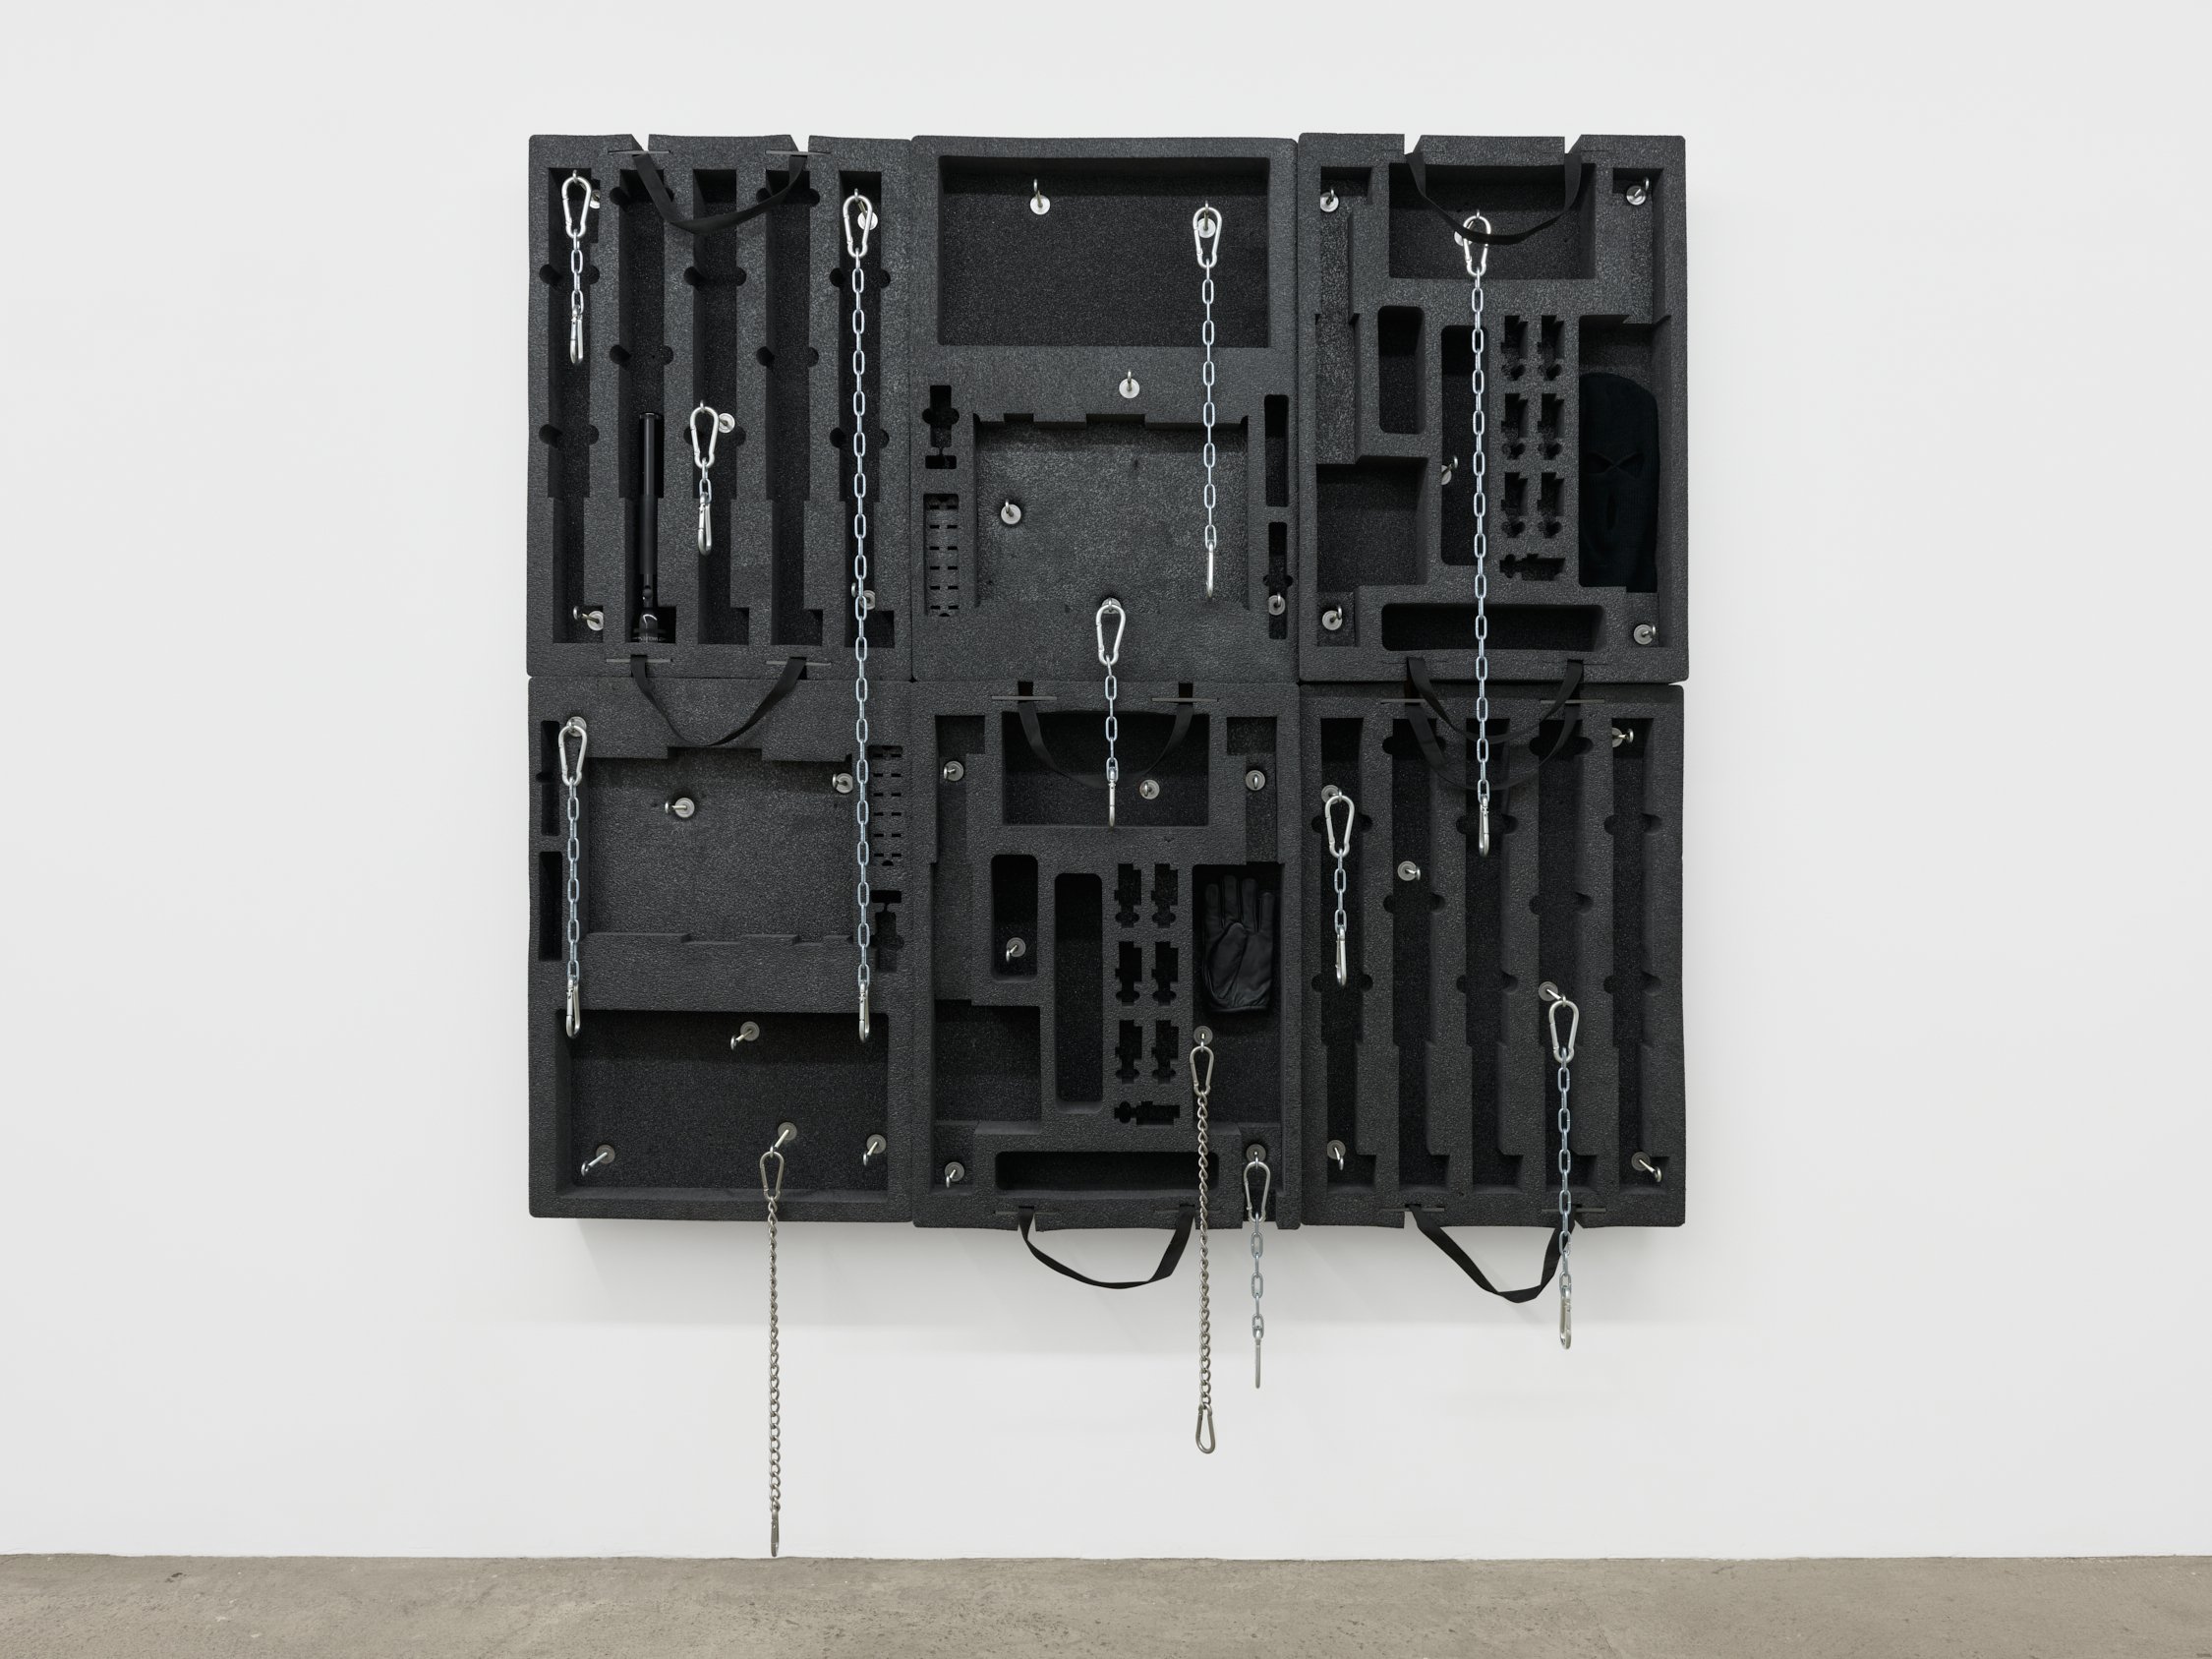  Joe Bartram  Constellation , 2022 Pelican case inserts, stainless steel chain, snap links,  miscellaneous hardware, wood, ski mask, Maglite, leather glove 72 x 68 x 8 inches (183 x 173 x 20 cm) JB2 